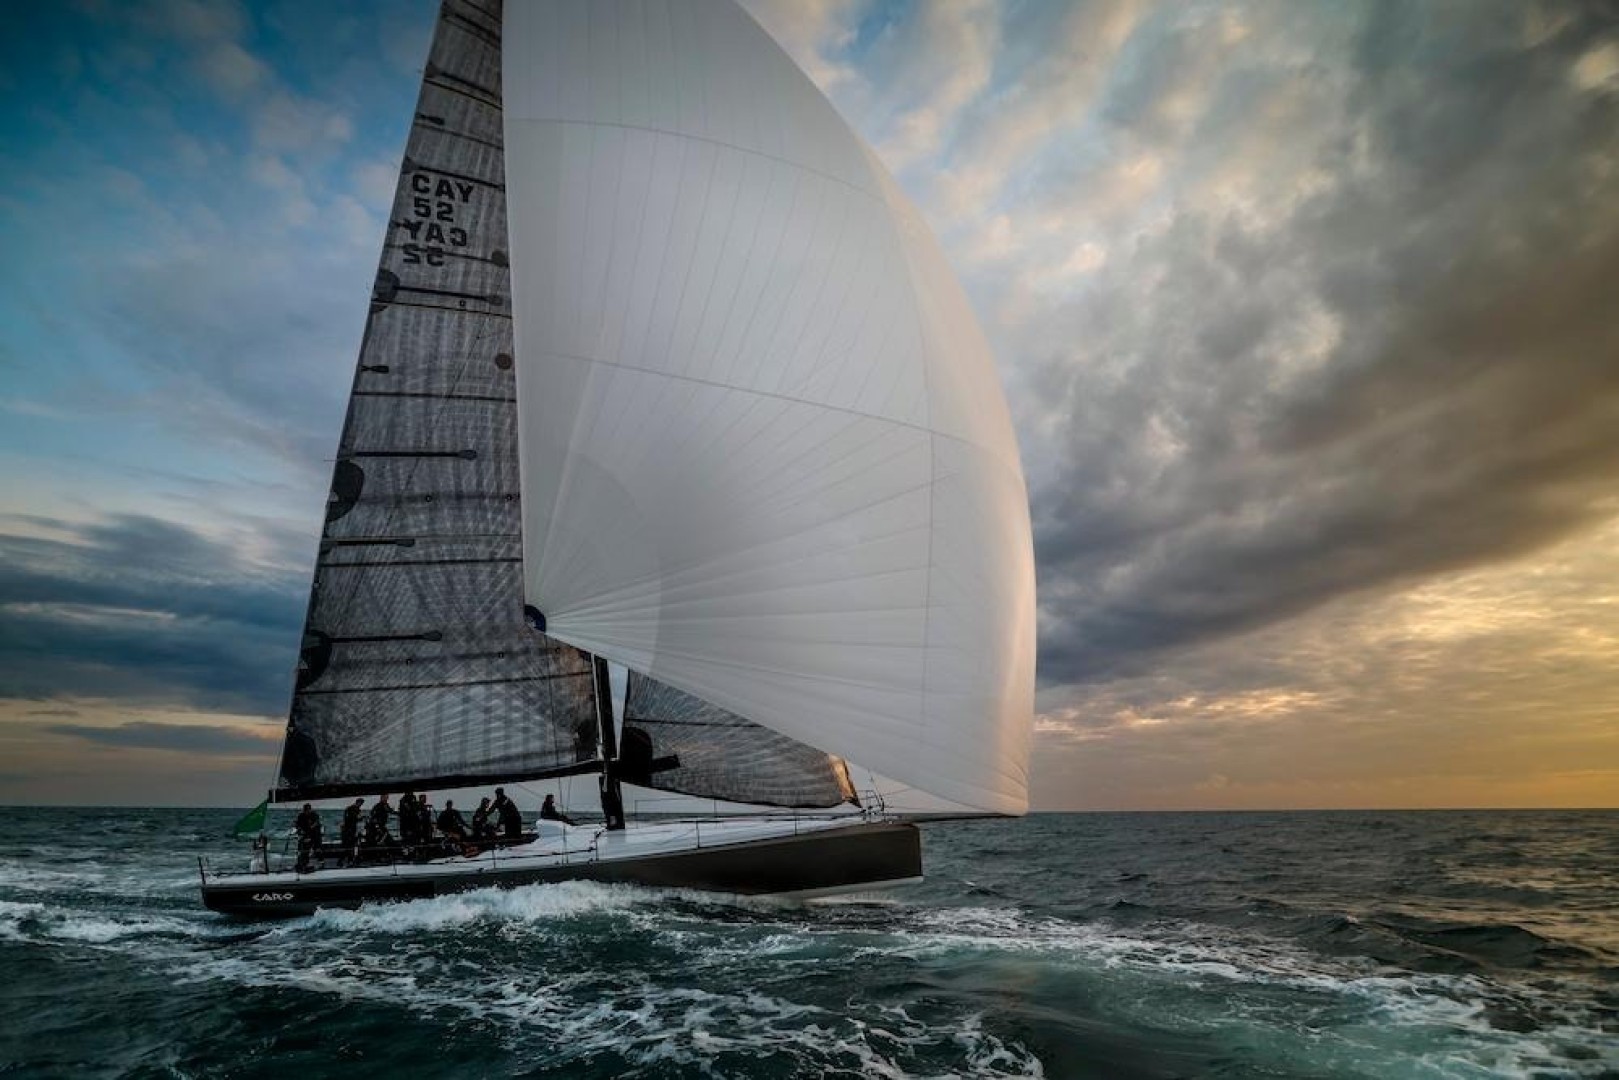 Caro sails in to Cherbourg-en-Contentin, securing victory in IRC Zero ﻿© Paul Wyeth/pwpictures.com